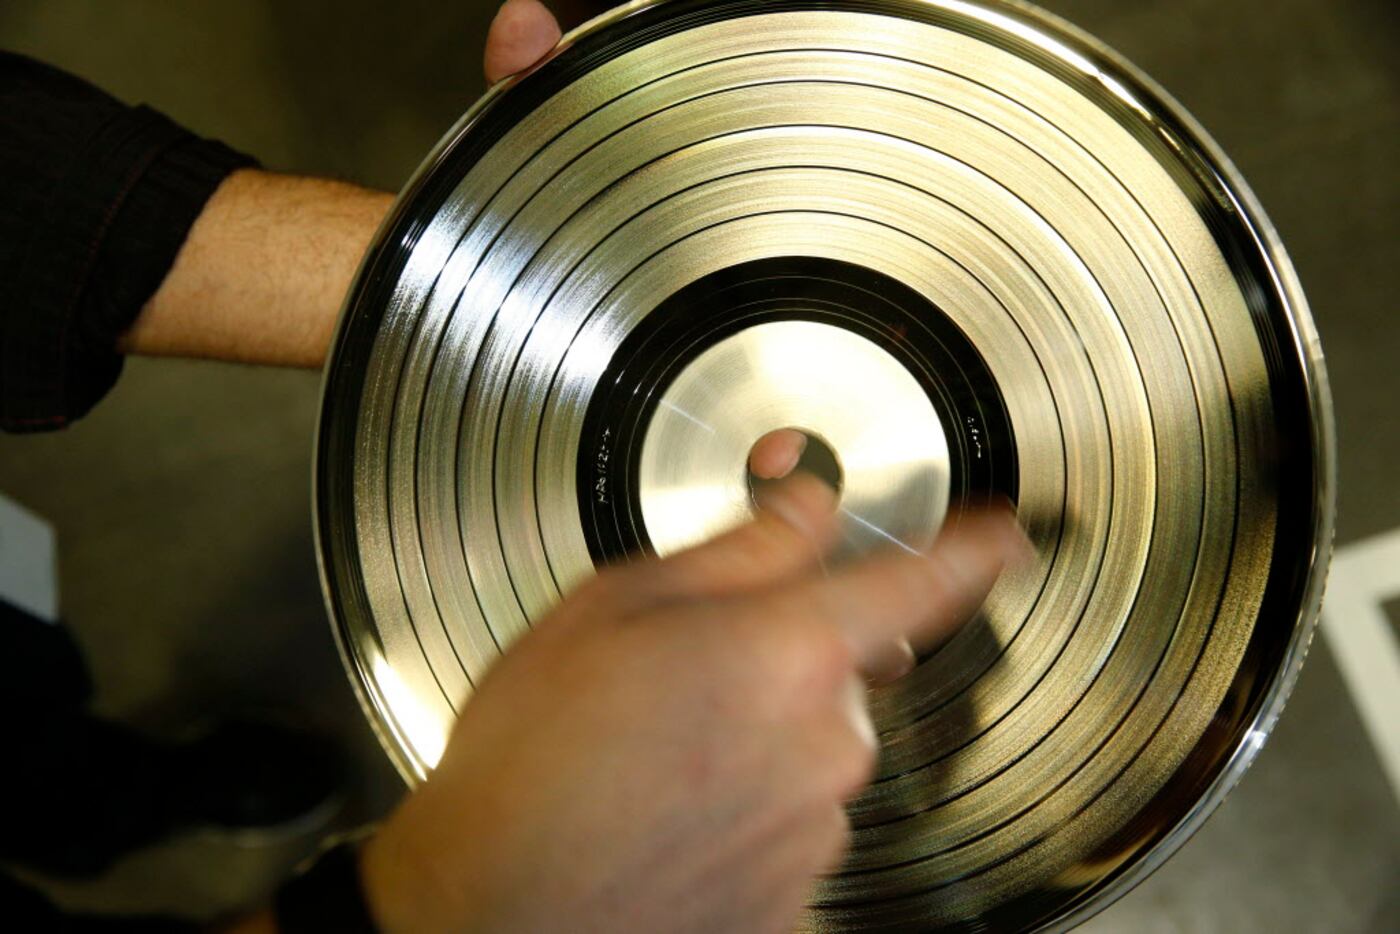 A metal master that is used to press records at Hand Drawn Pressing in Addison, Texas on...